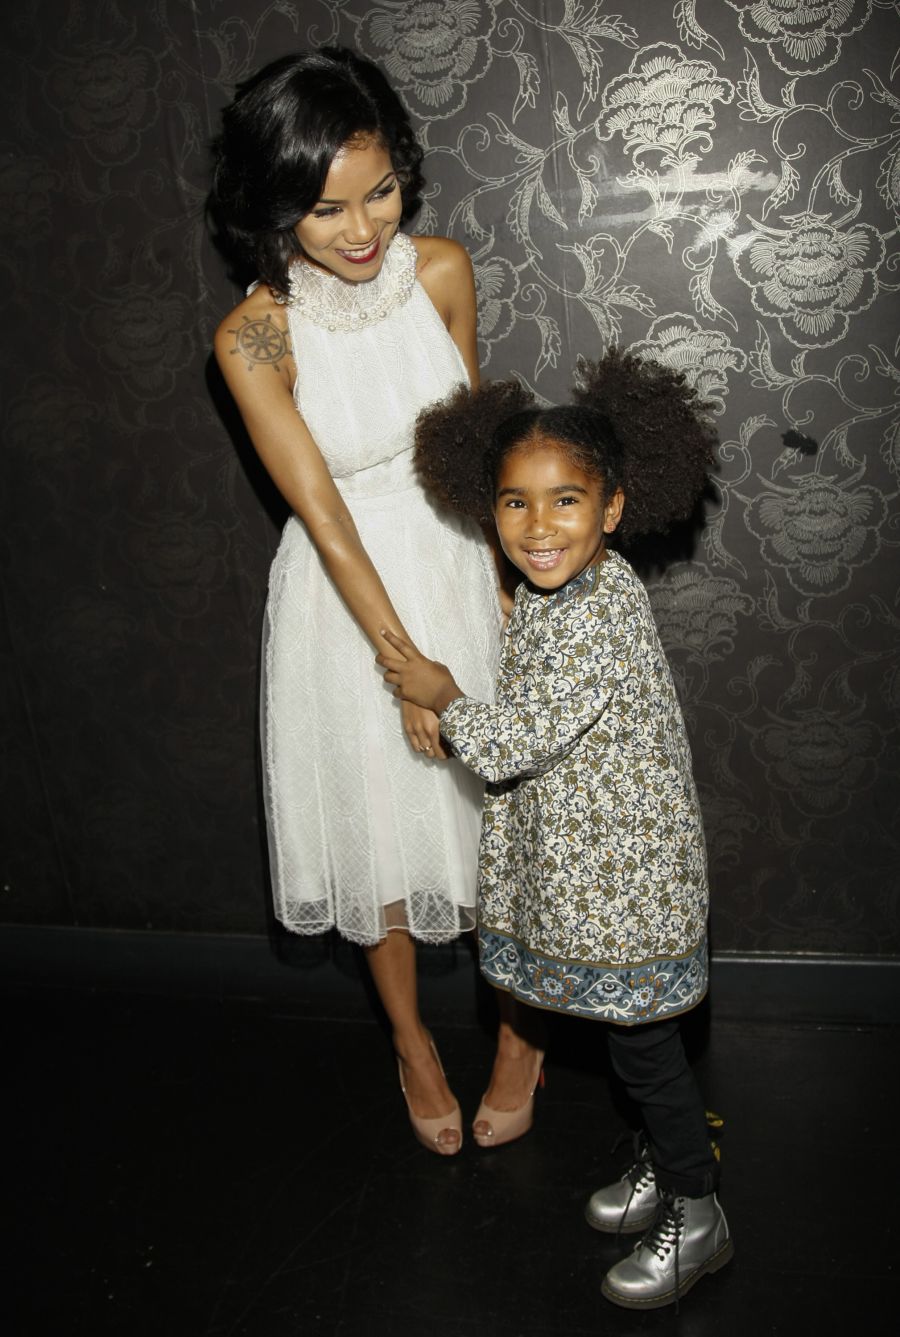 24 Pictures Of Jhene Aiko’s Adorable Daughter Namiko (PHOTOS) 97.9